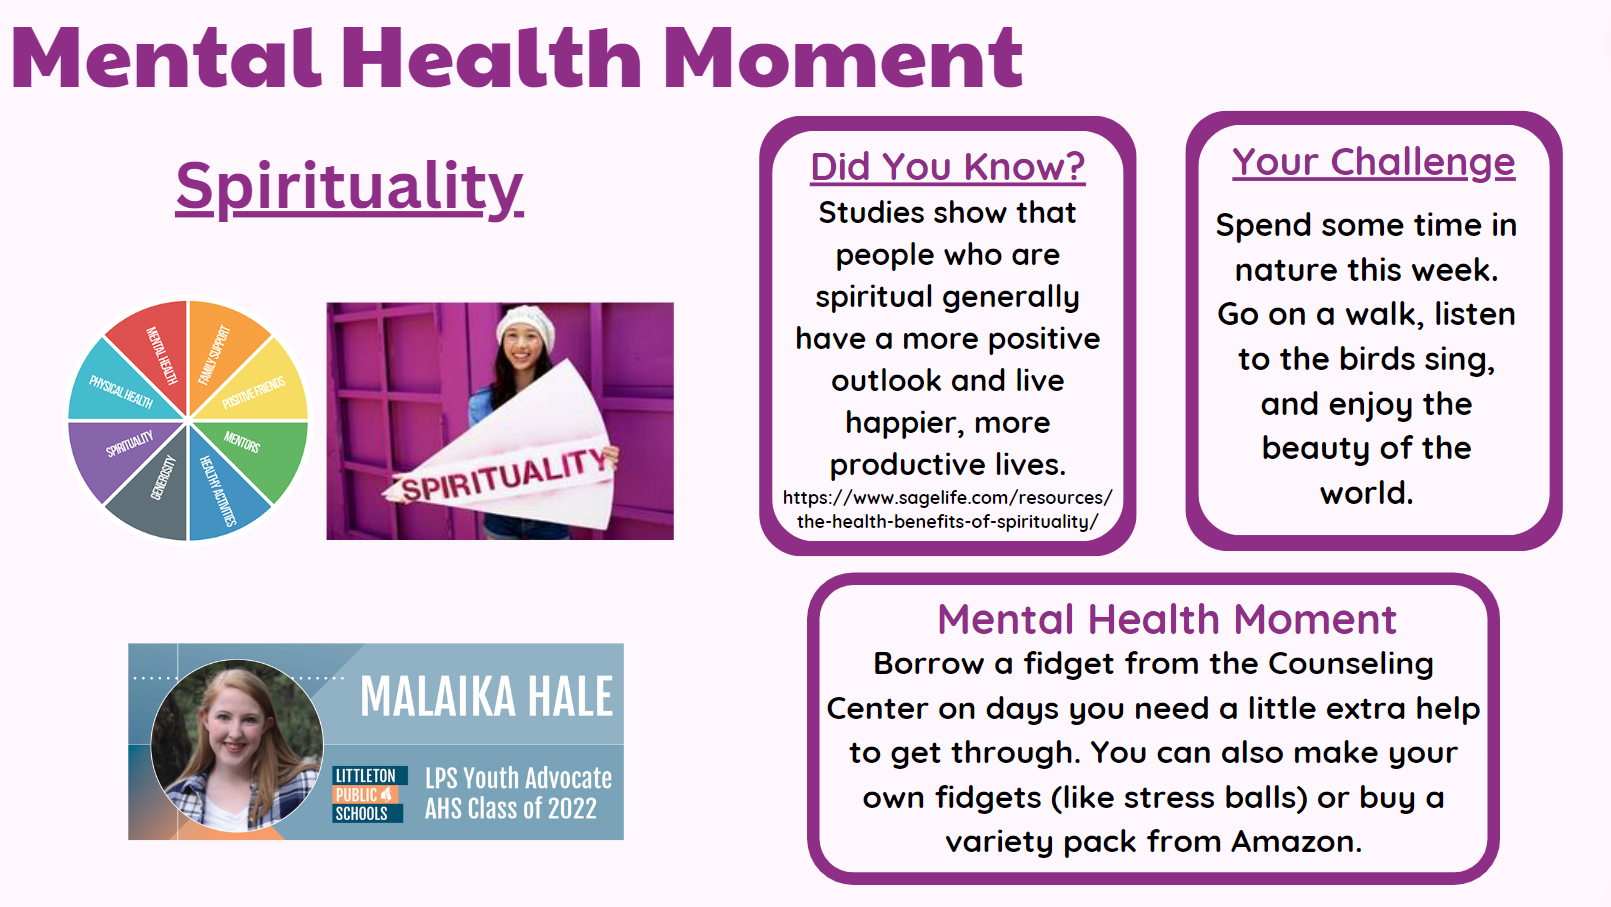 Mental Health Moment: SPIRITUALITY Malaika Hale, LPS Youth Advocate, AHS Class of 2022  Did you know? Studies show that people who are spiritual generally have a more positive outlook and live happier, more productive lives. https://www.sagelife.ocm/resources/the-health-benefits-of-spirituality/  Your Challenge Spend some time in nature this week. Go on a walk, listen to the birds sing, and enjoy the beauty of the world.  Mental Health Moment Borrow a fidget from the Counsling Center on days you need a little extra help to get through. You can also make your own fidgets (like stress balls) or buy a variety pack from Amazon.